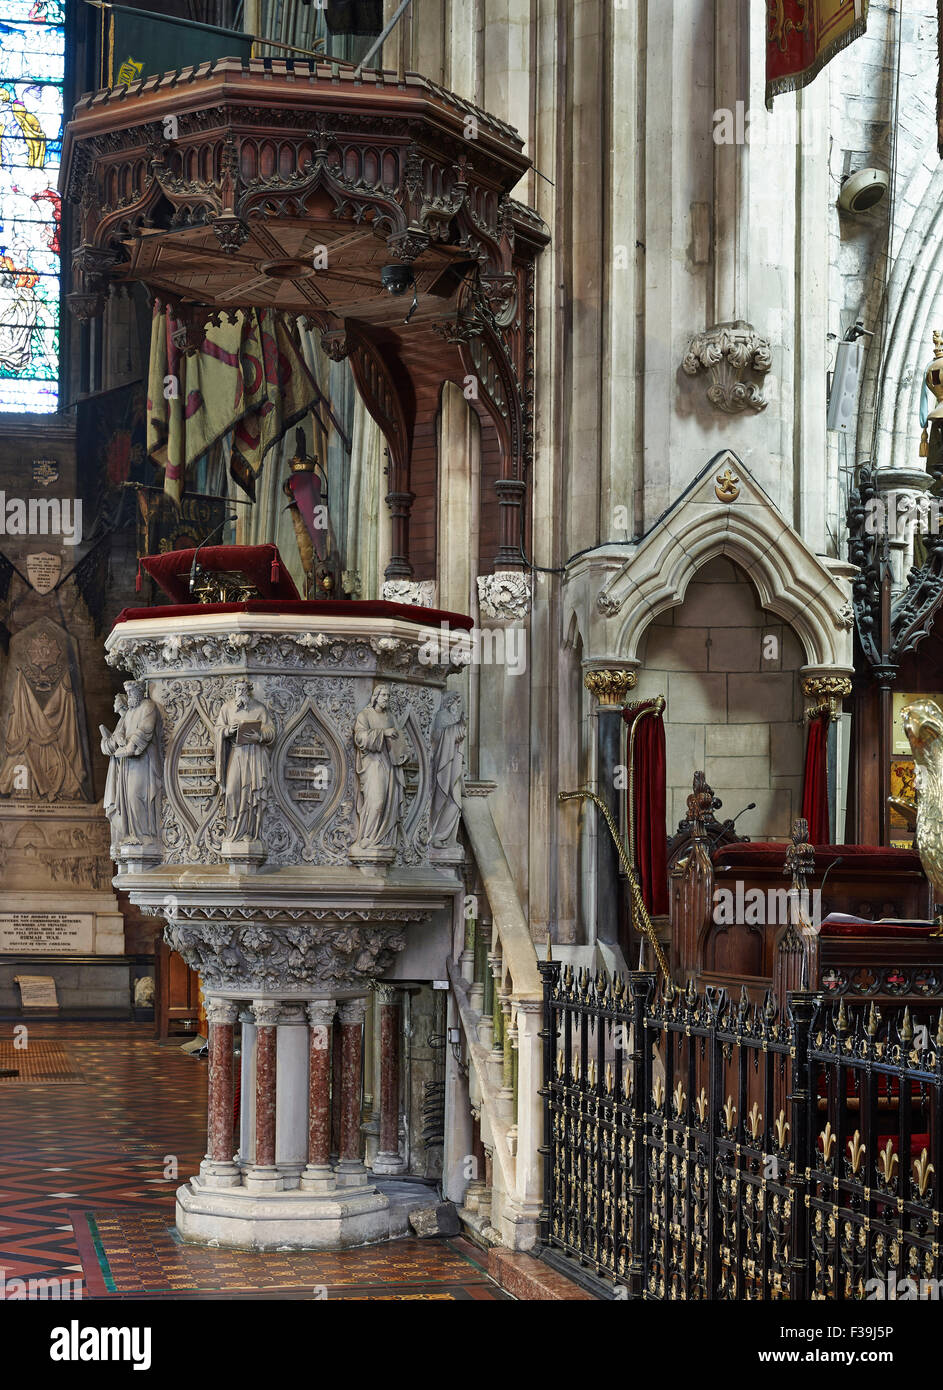 St Patrick's Cathedral Dublin pulpit Stock Photo